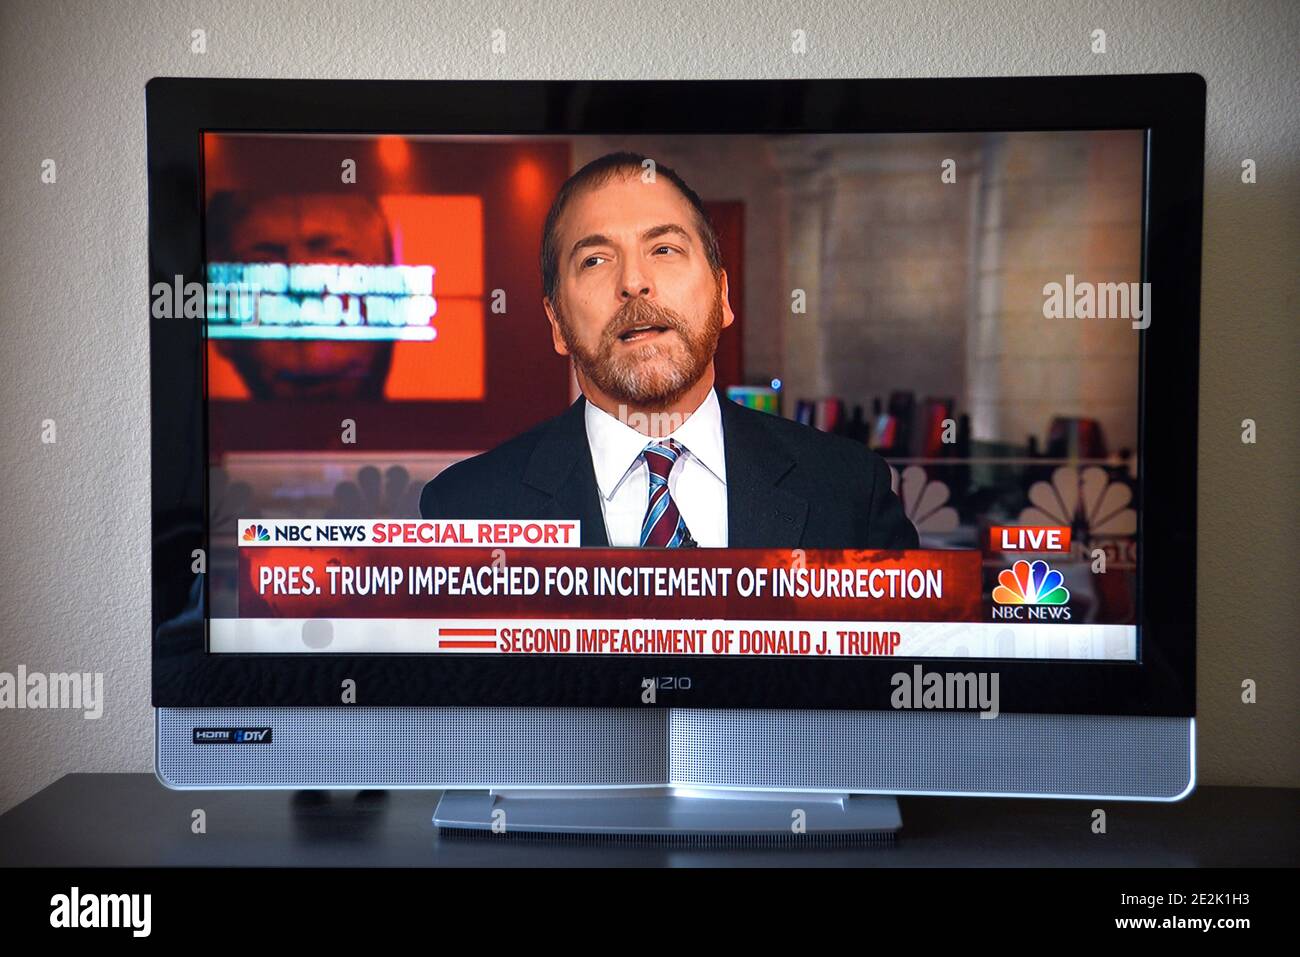 A television screen shot shows NBC Political Director Chuck Todd reacting to U.S. President Donald Trump's second impeachment. Stock Photo